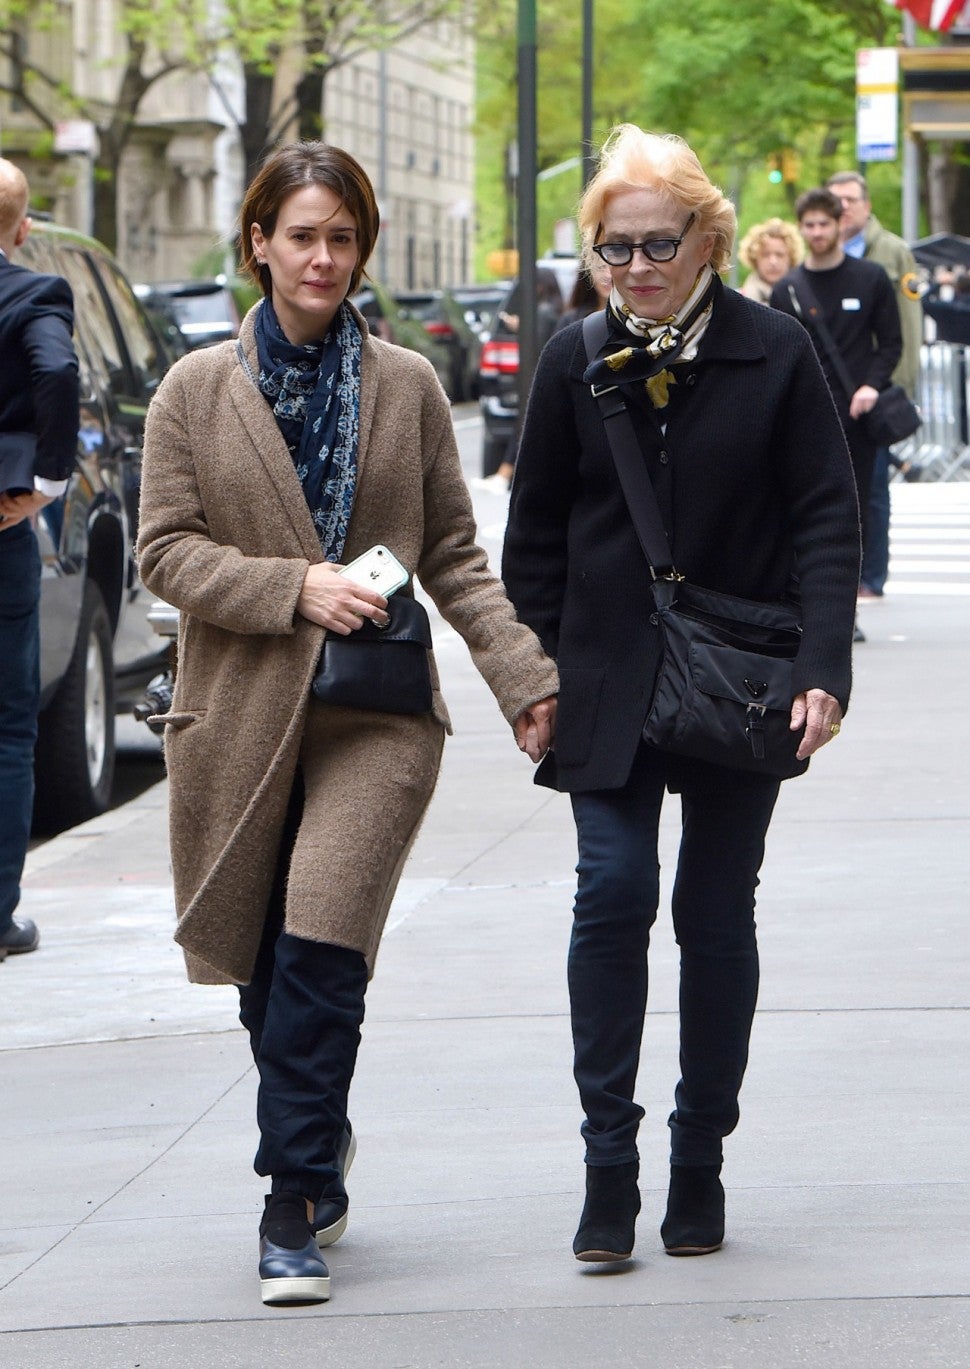 Sarah Paulson and Girlfriend Holland Taylor Hold Hands on Romantic NYC